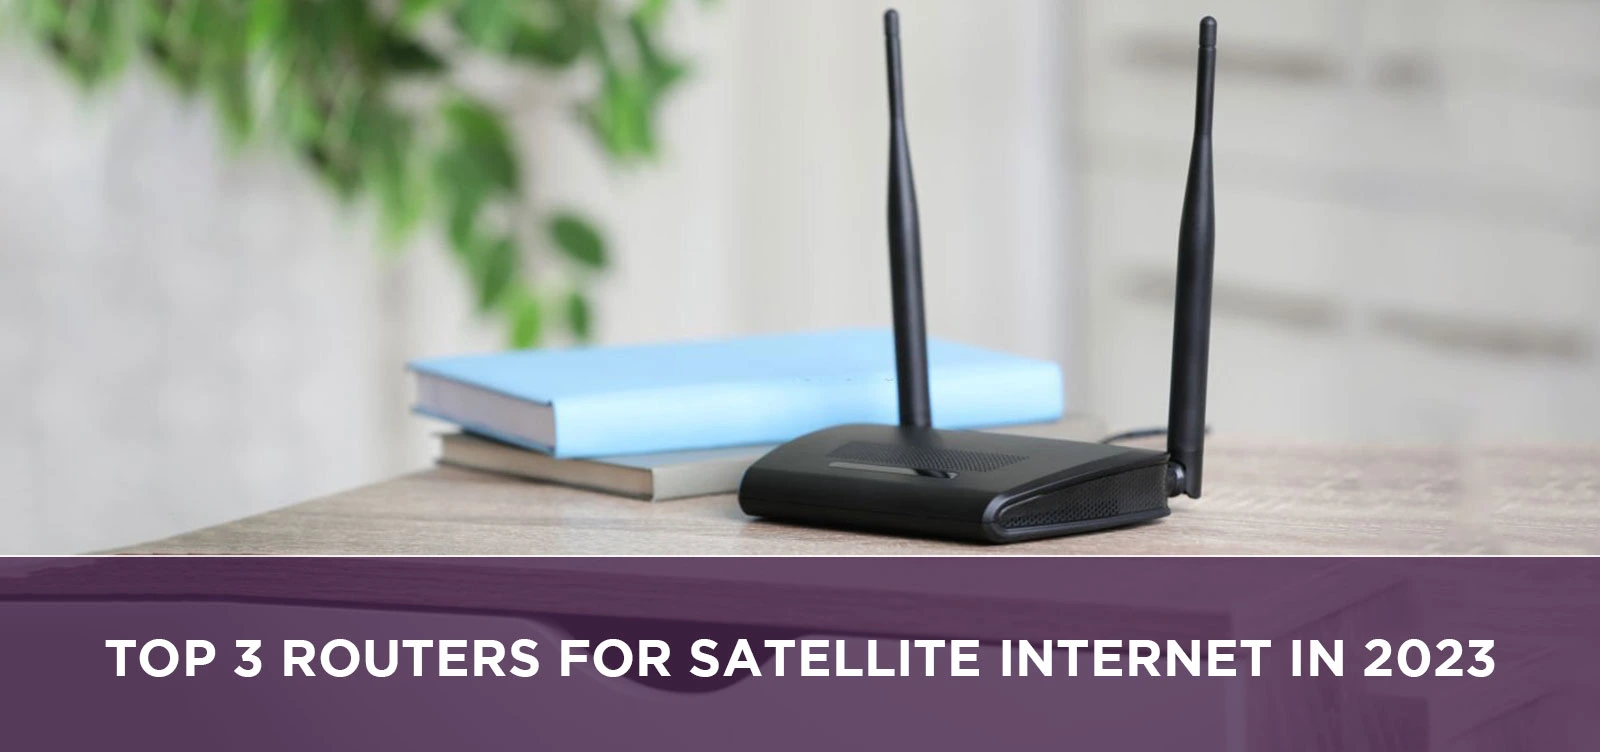 Top 3 Routers for Satellite Internet in 2023